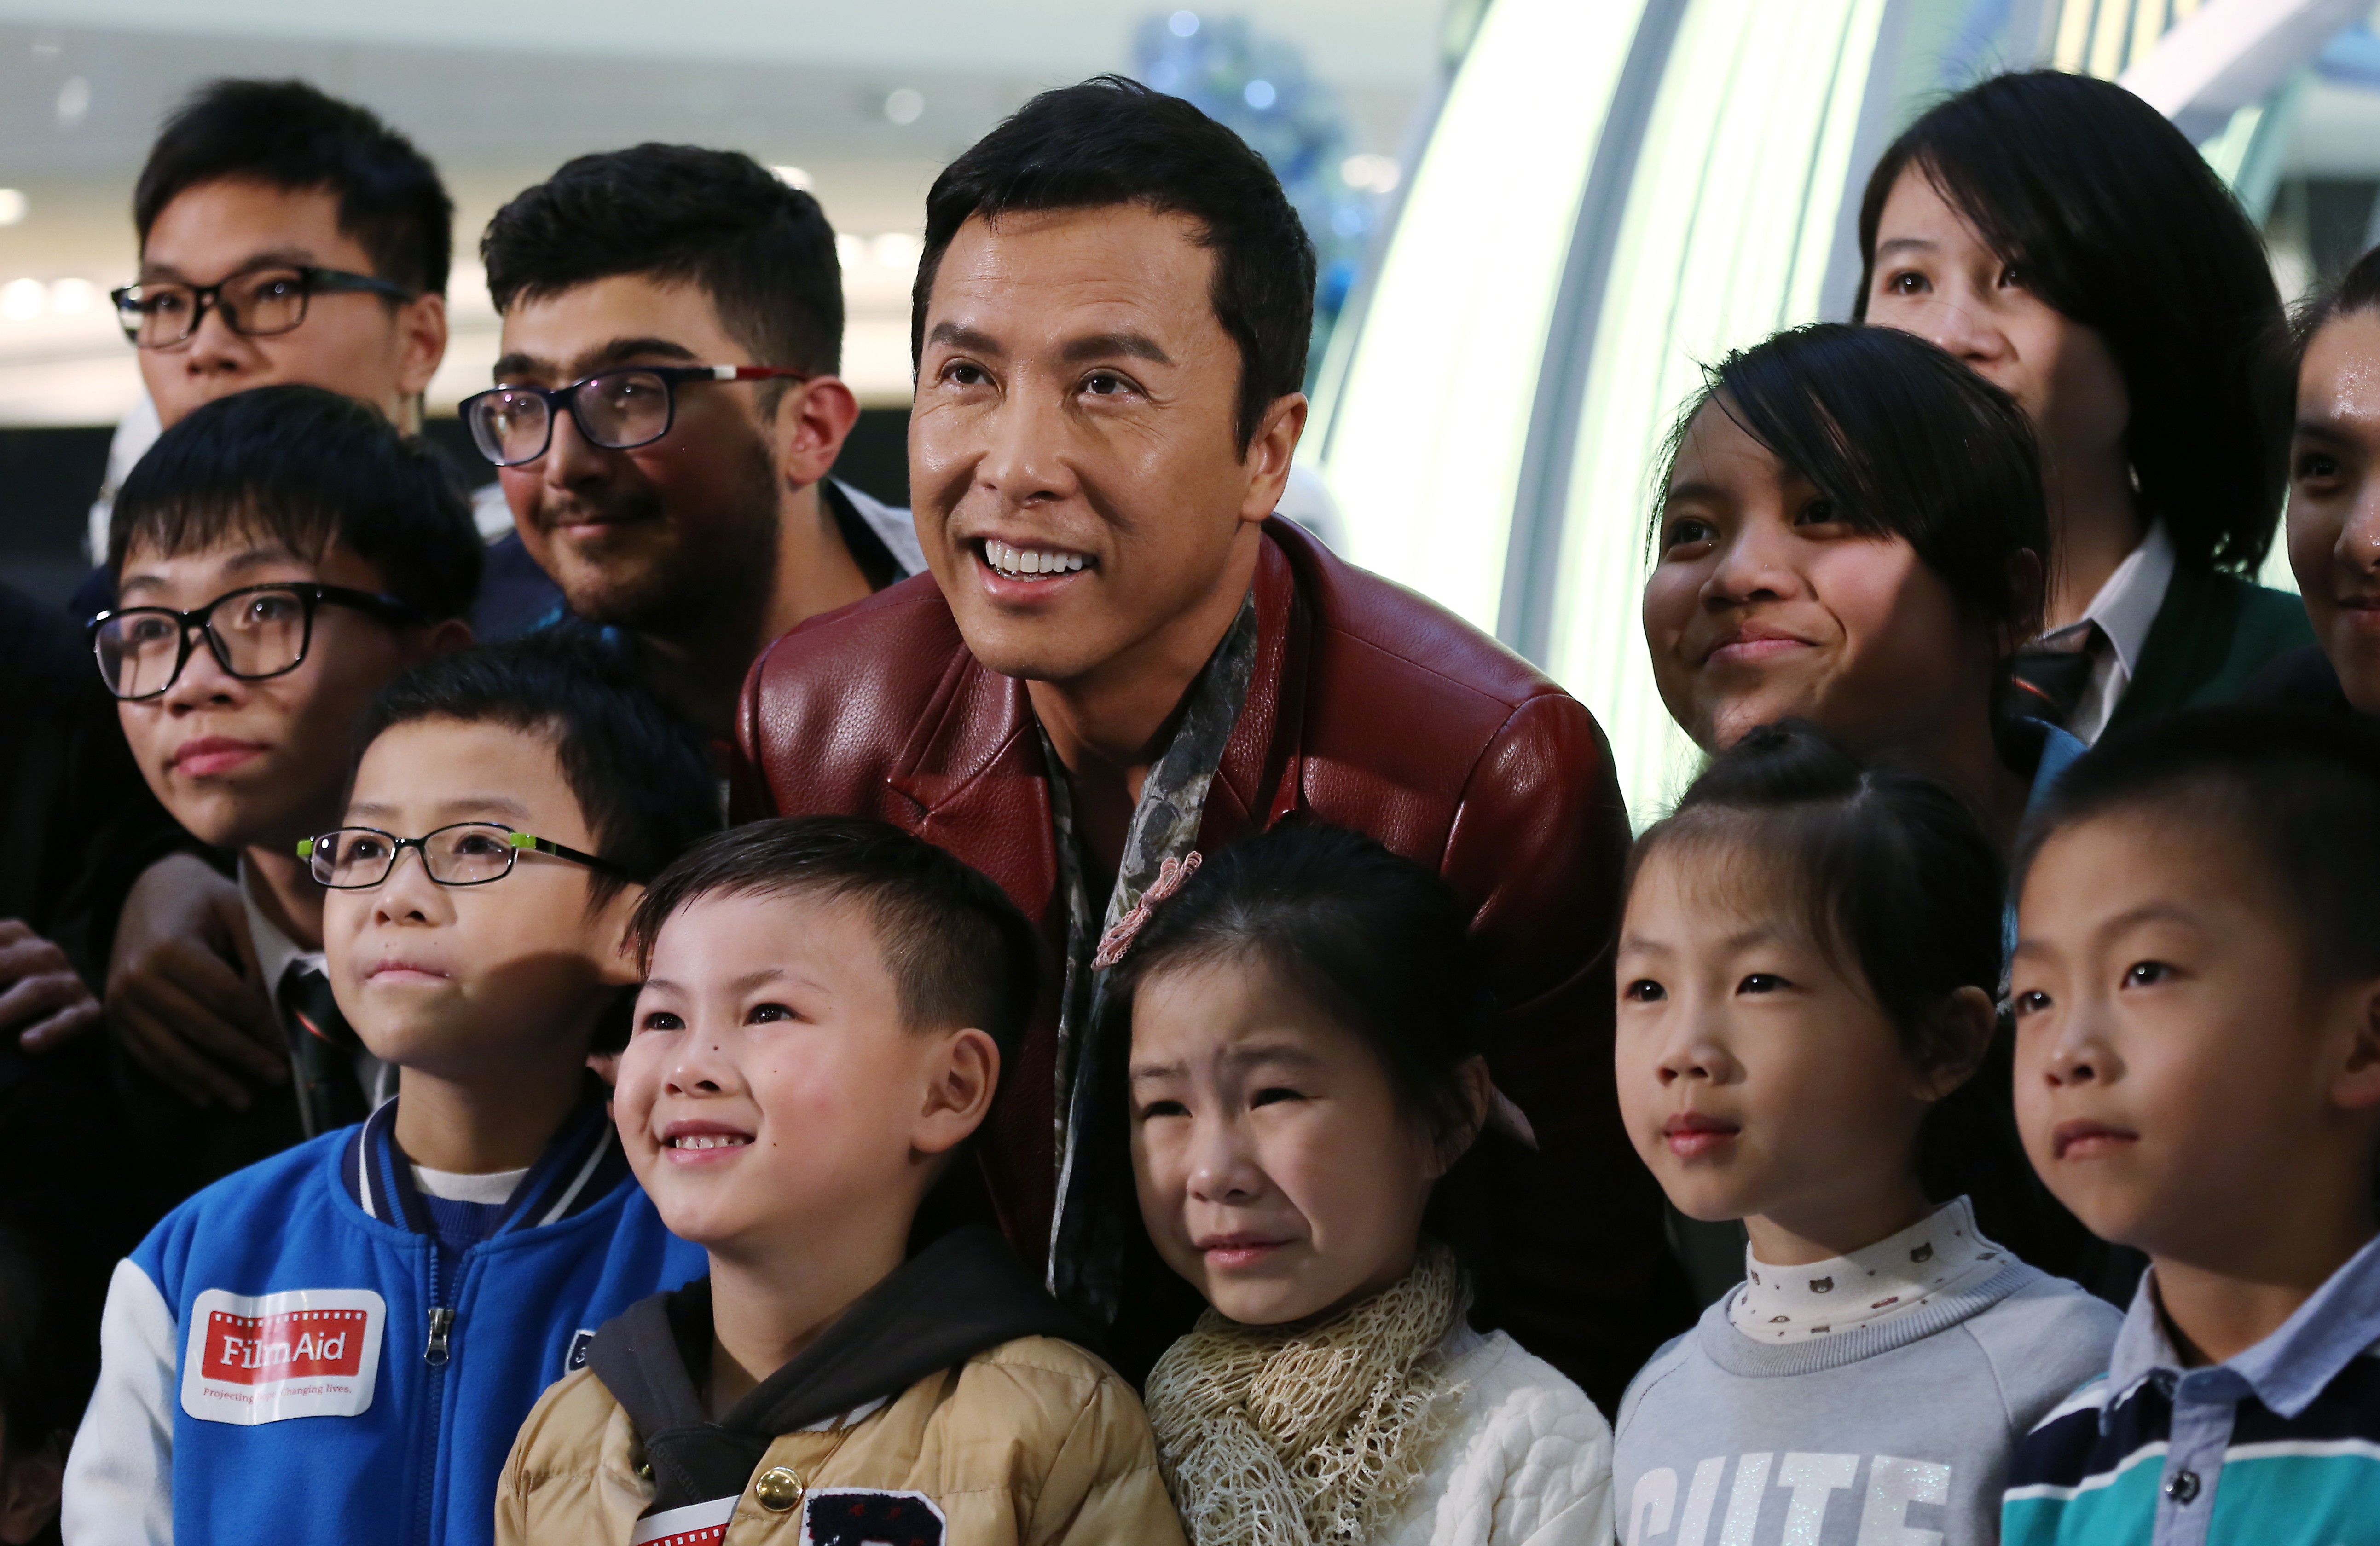 Actor Donnie Yen Ji-dan (centre) and fans pose for a photo at the premiere of Rogue One: A Star Wars Story, in Mong Kok last December. The Chicken Soup Foundation treated 300 underprivileged children to the premiere. Photo: Jonathan Wong